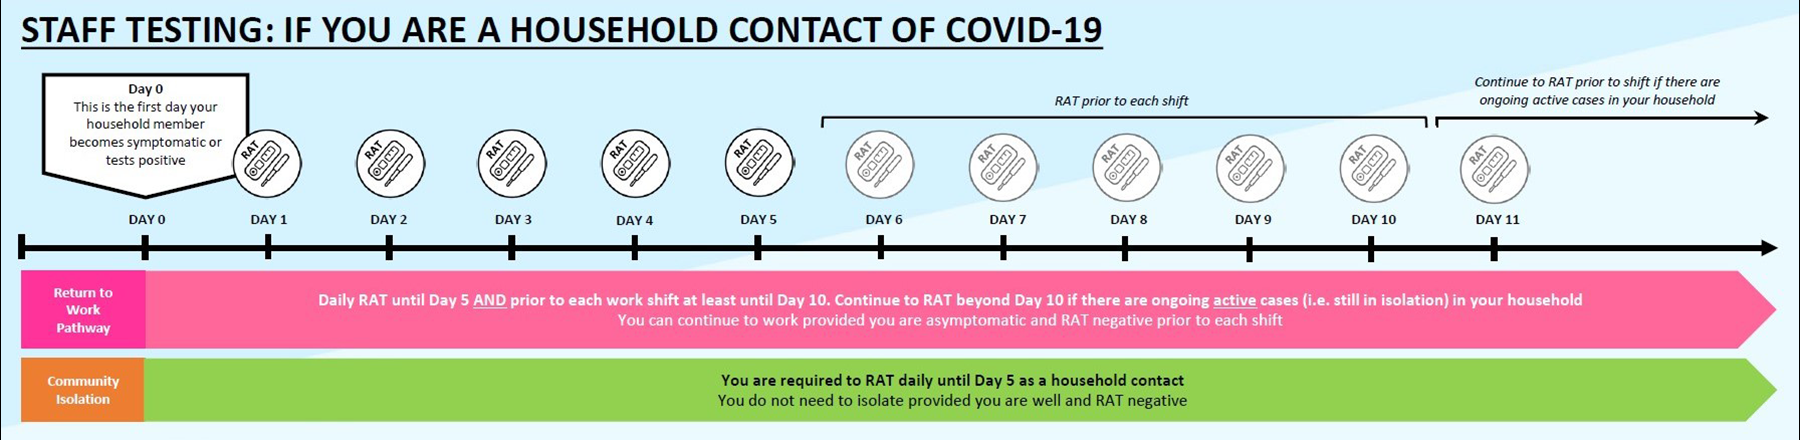 If you have a family or household member with confirmed COVID-19